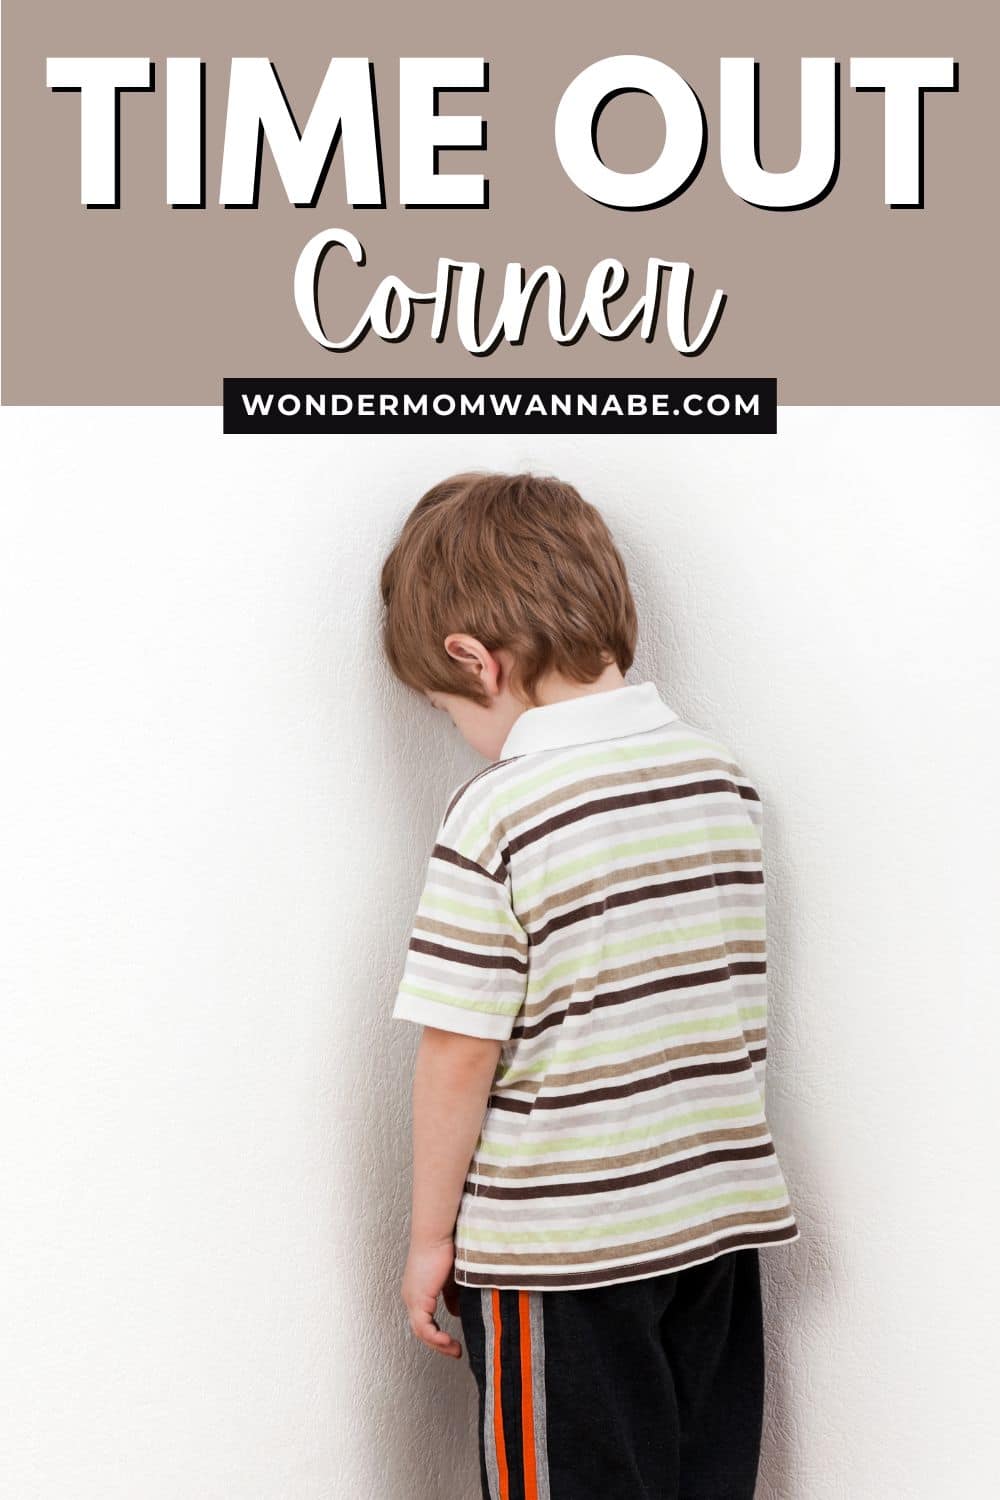 A young child standing facing a wall in a designated 'time out corner'.